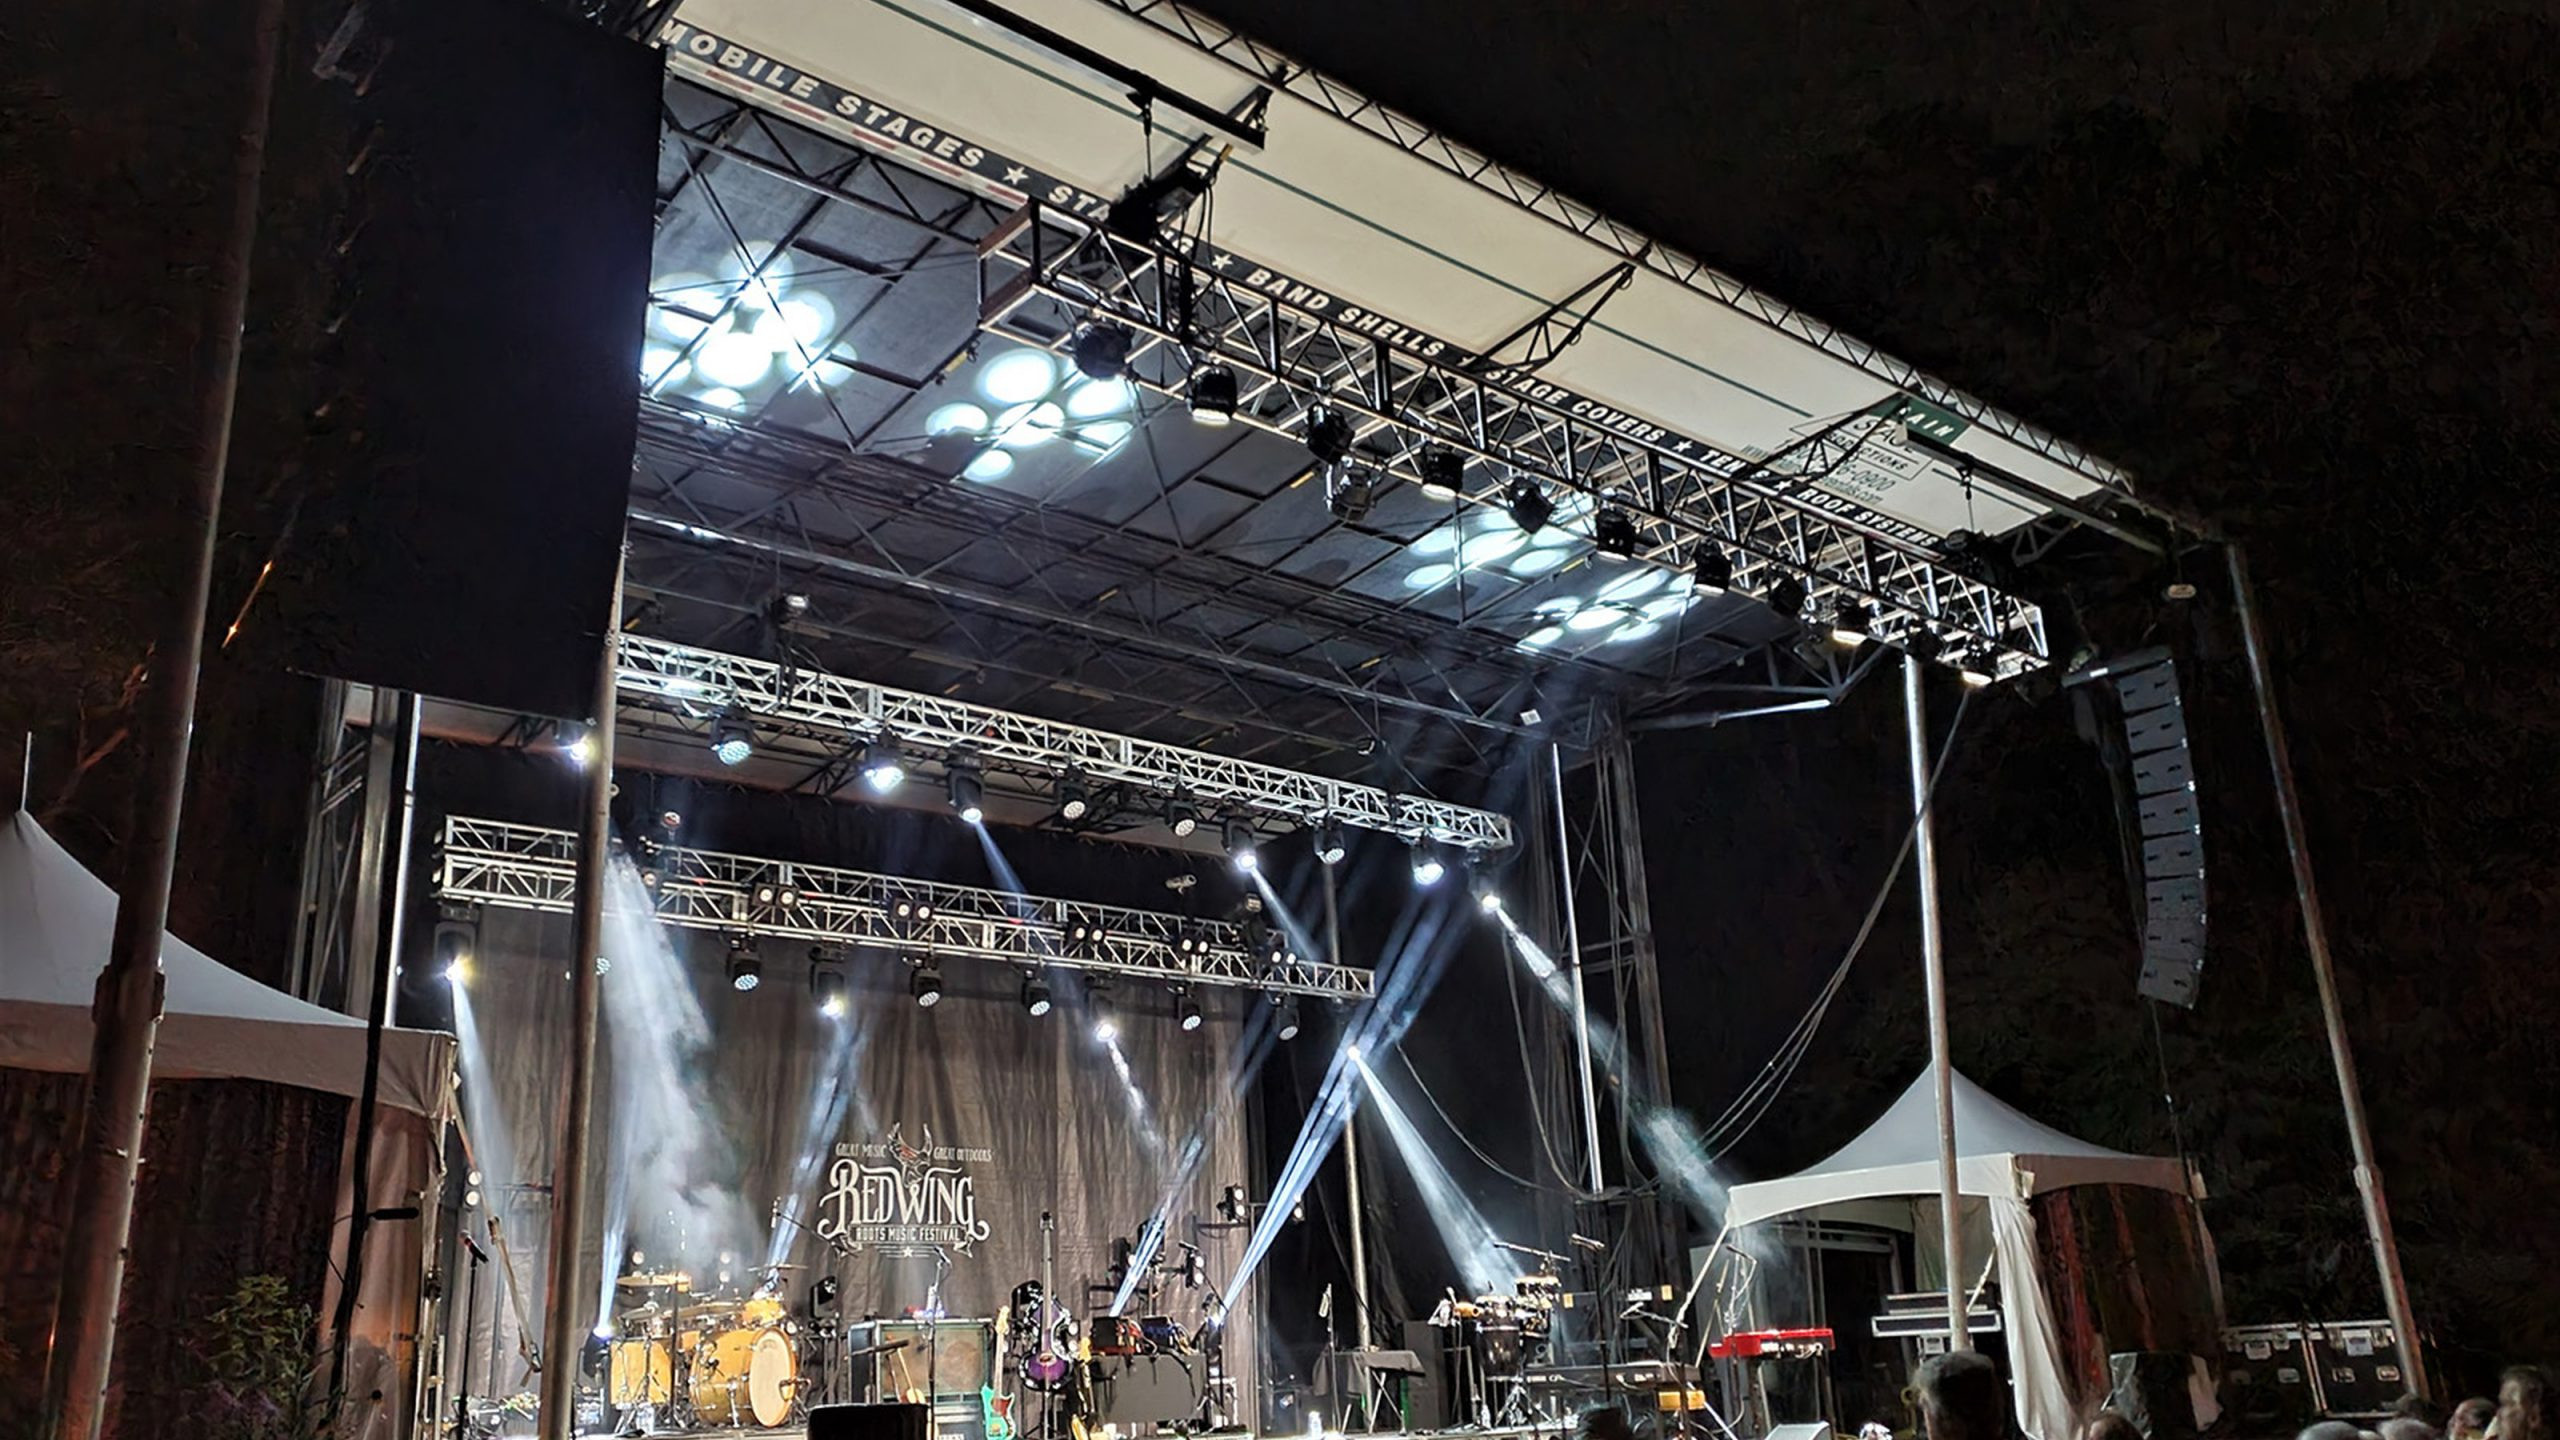 Martin Audio wavefront precision speakers on stage at red wing festival